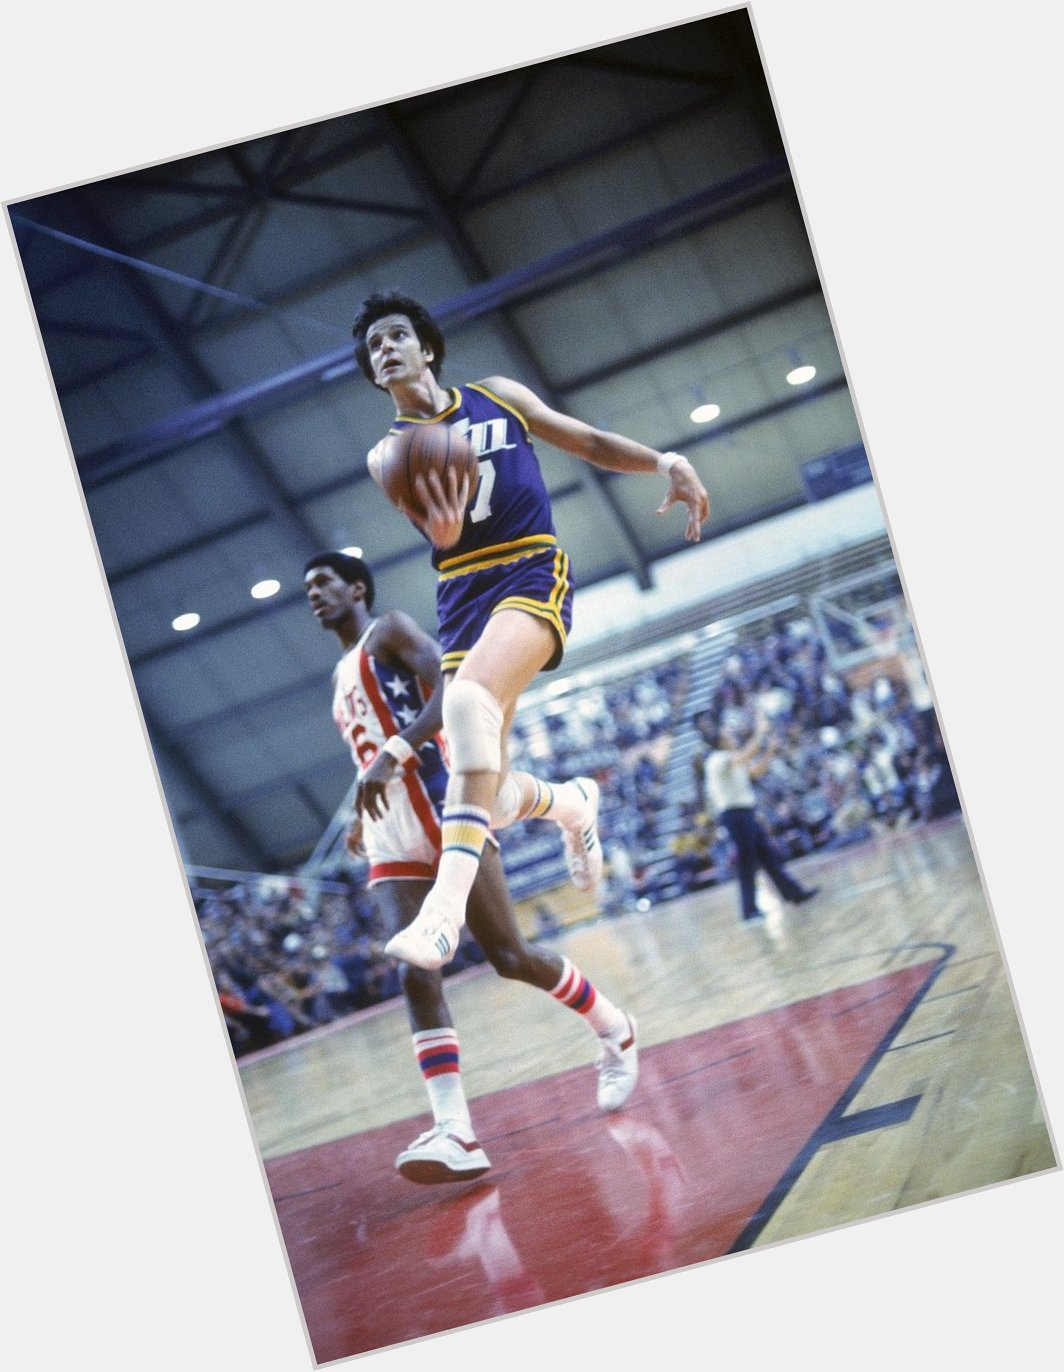 Wishing a Happy Birthday to the late Pete Maravich.  : Focus on Sport/Getty Images 